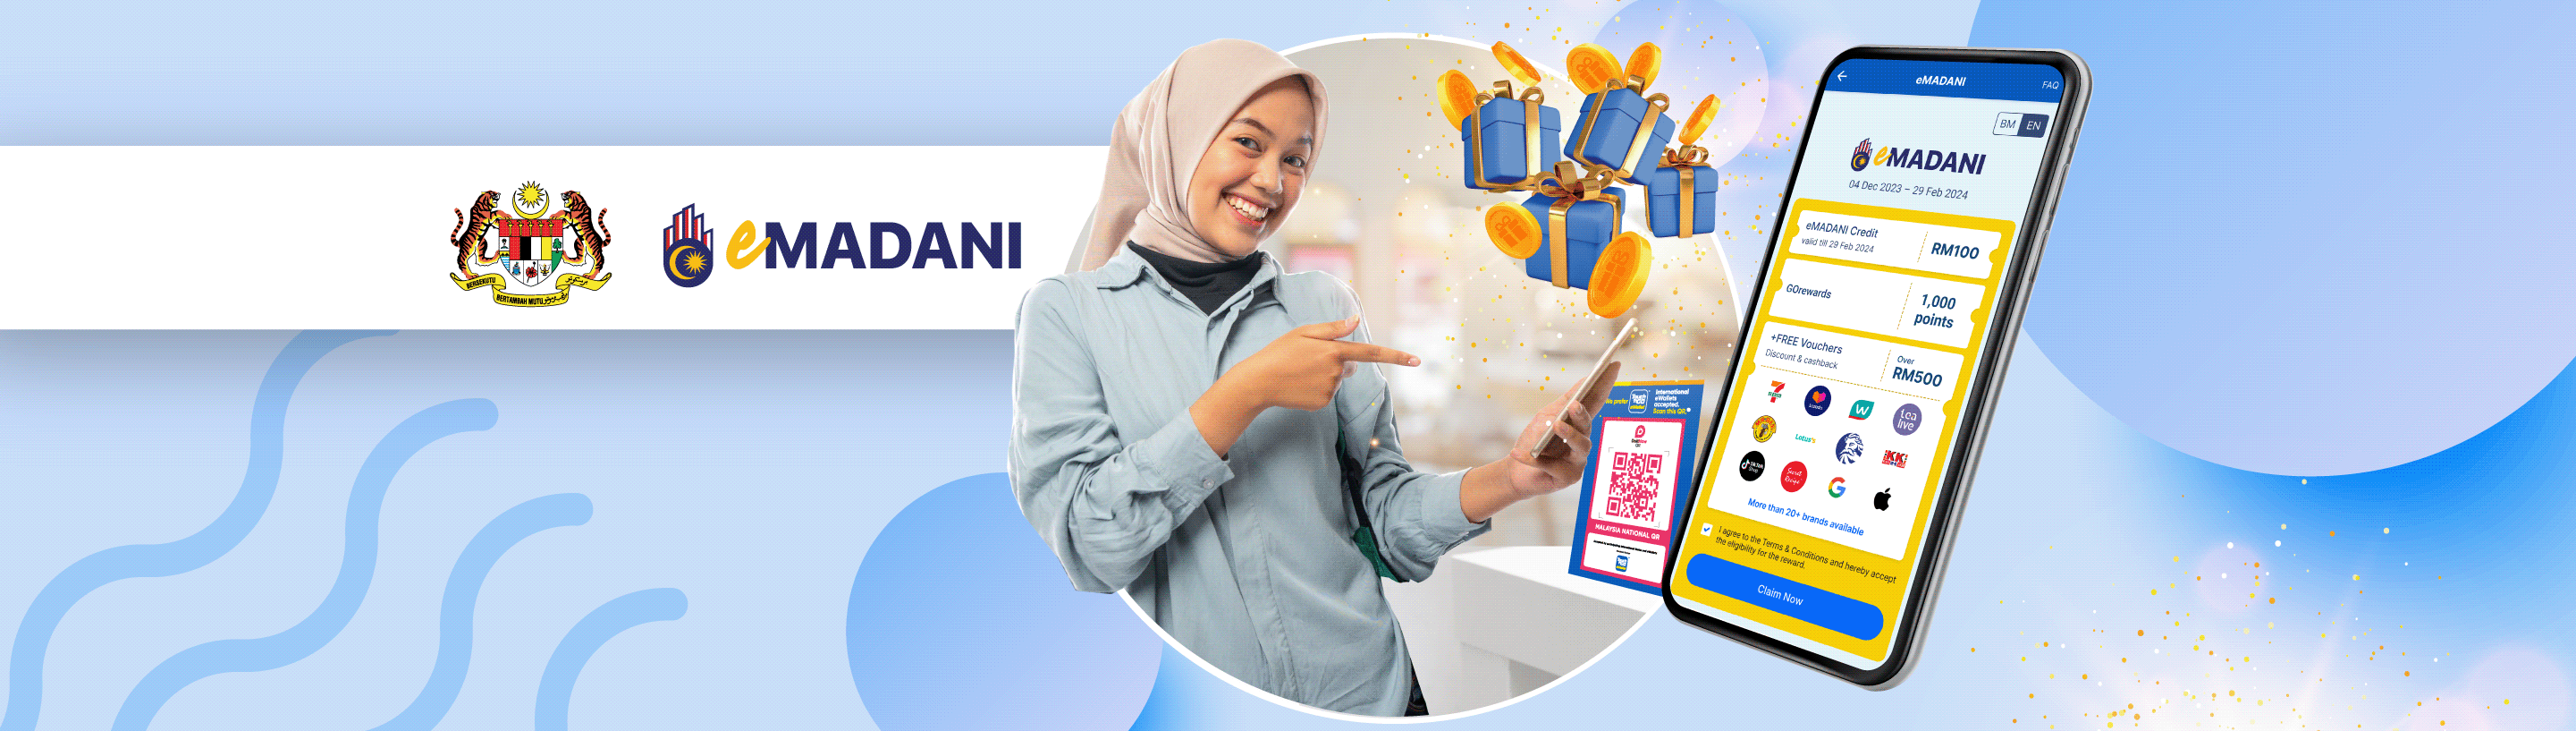 RM100 million worth of points and free vouchers for successful eMADANI claimants with Touch ‘n Go eWallet